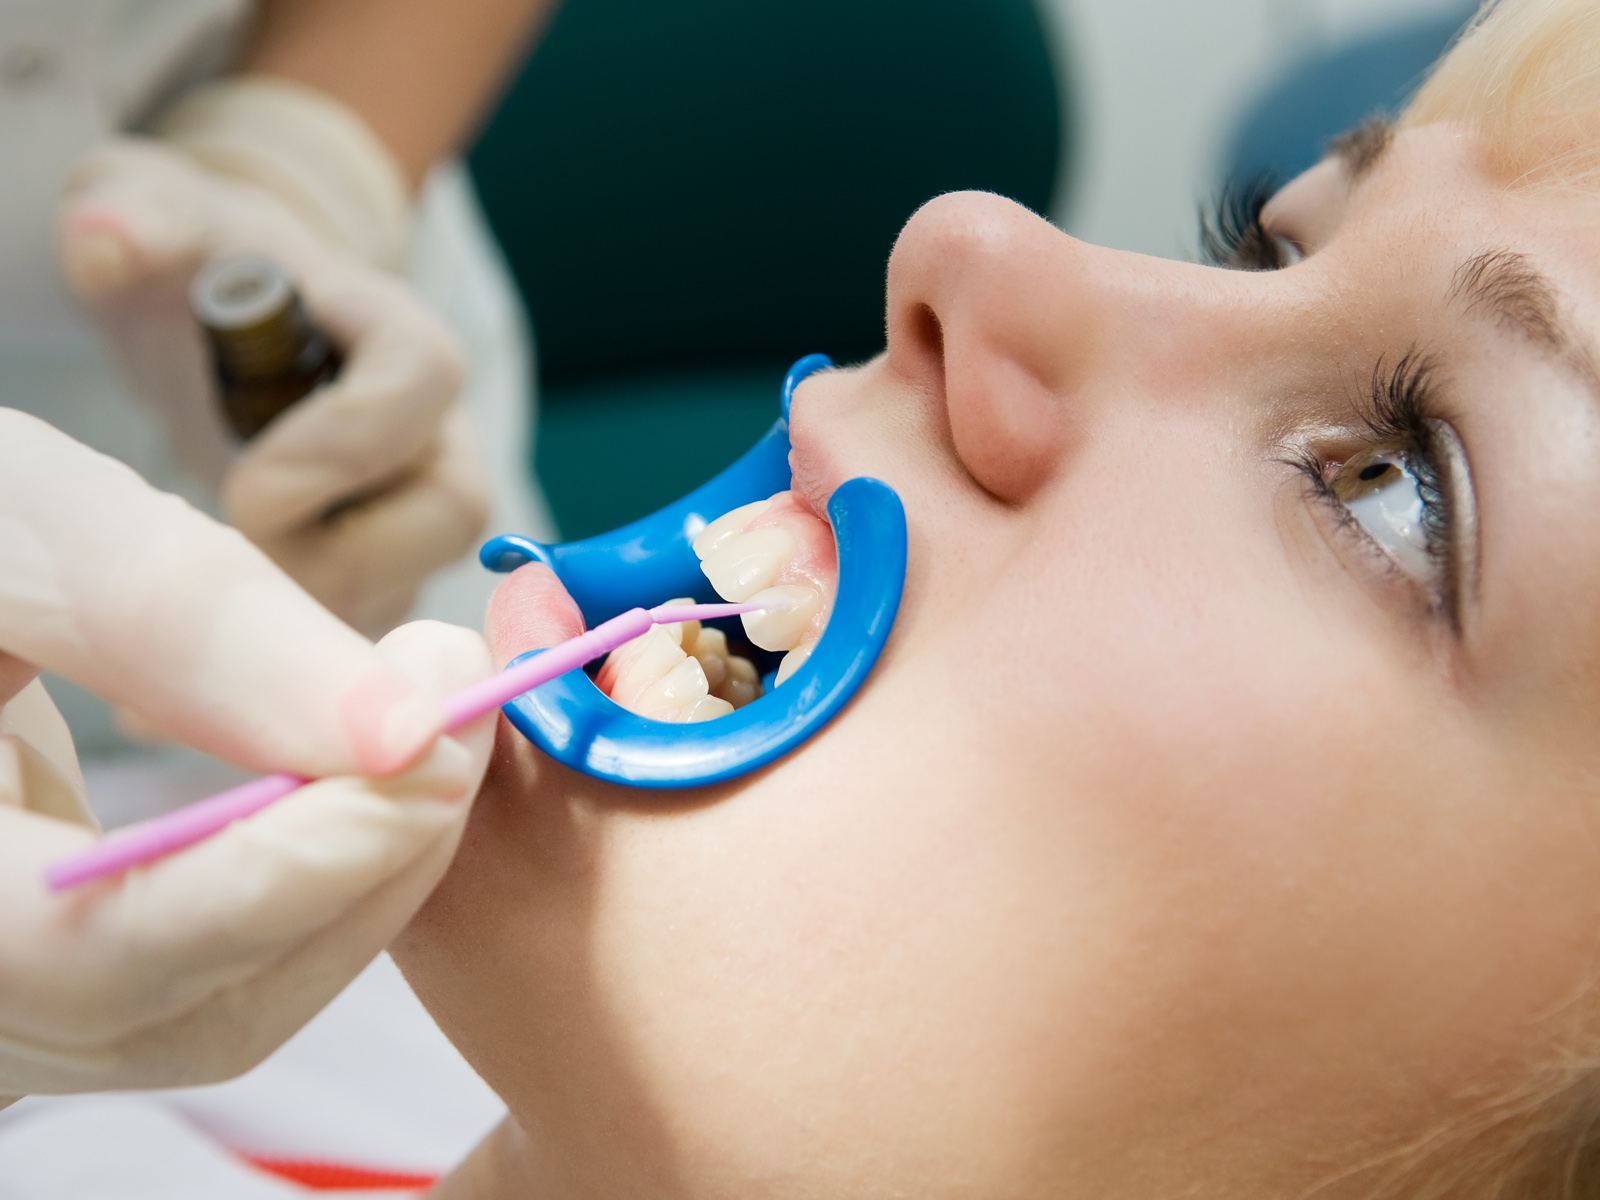 Can topical fluoride treatment protect your child from tooth decay?